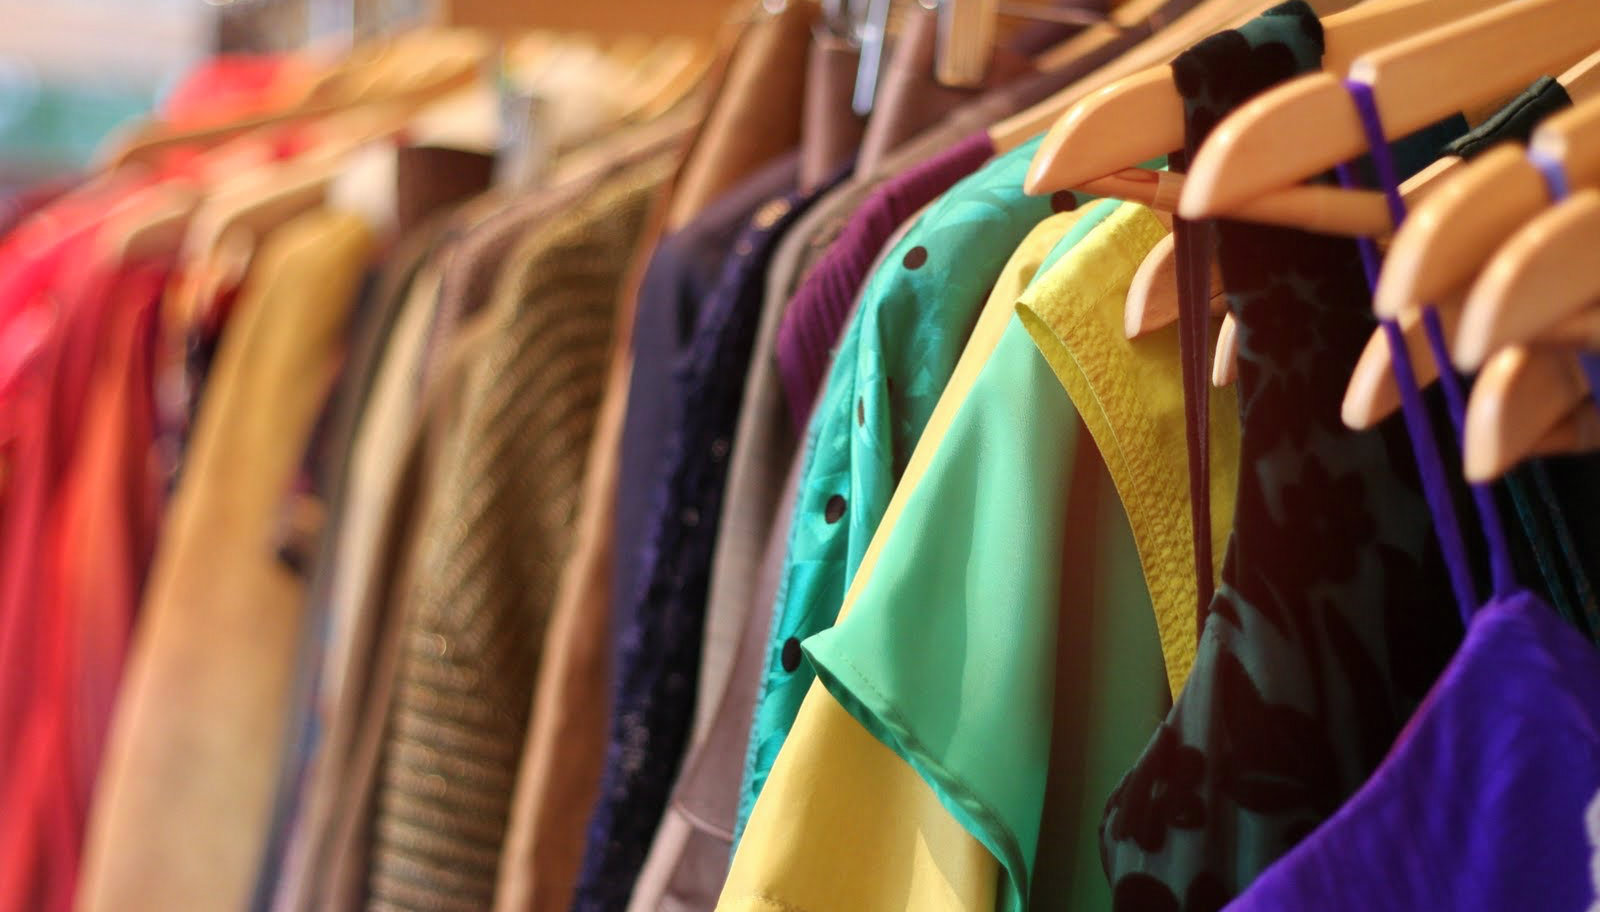 8 Straightforward Steps to (Successfully) Launch Clothing Distribution Company